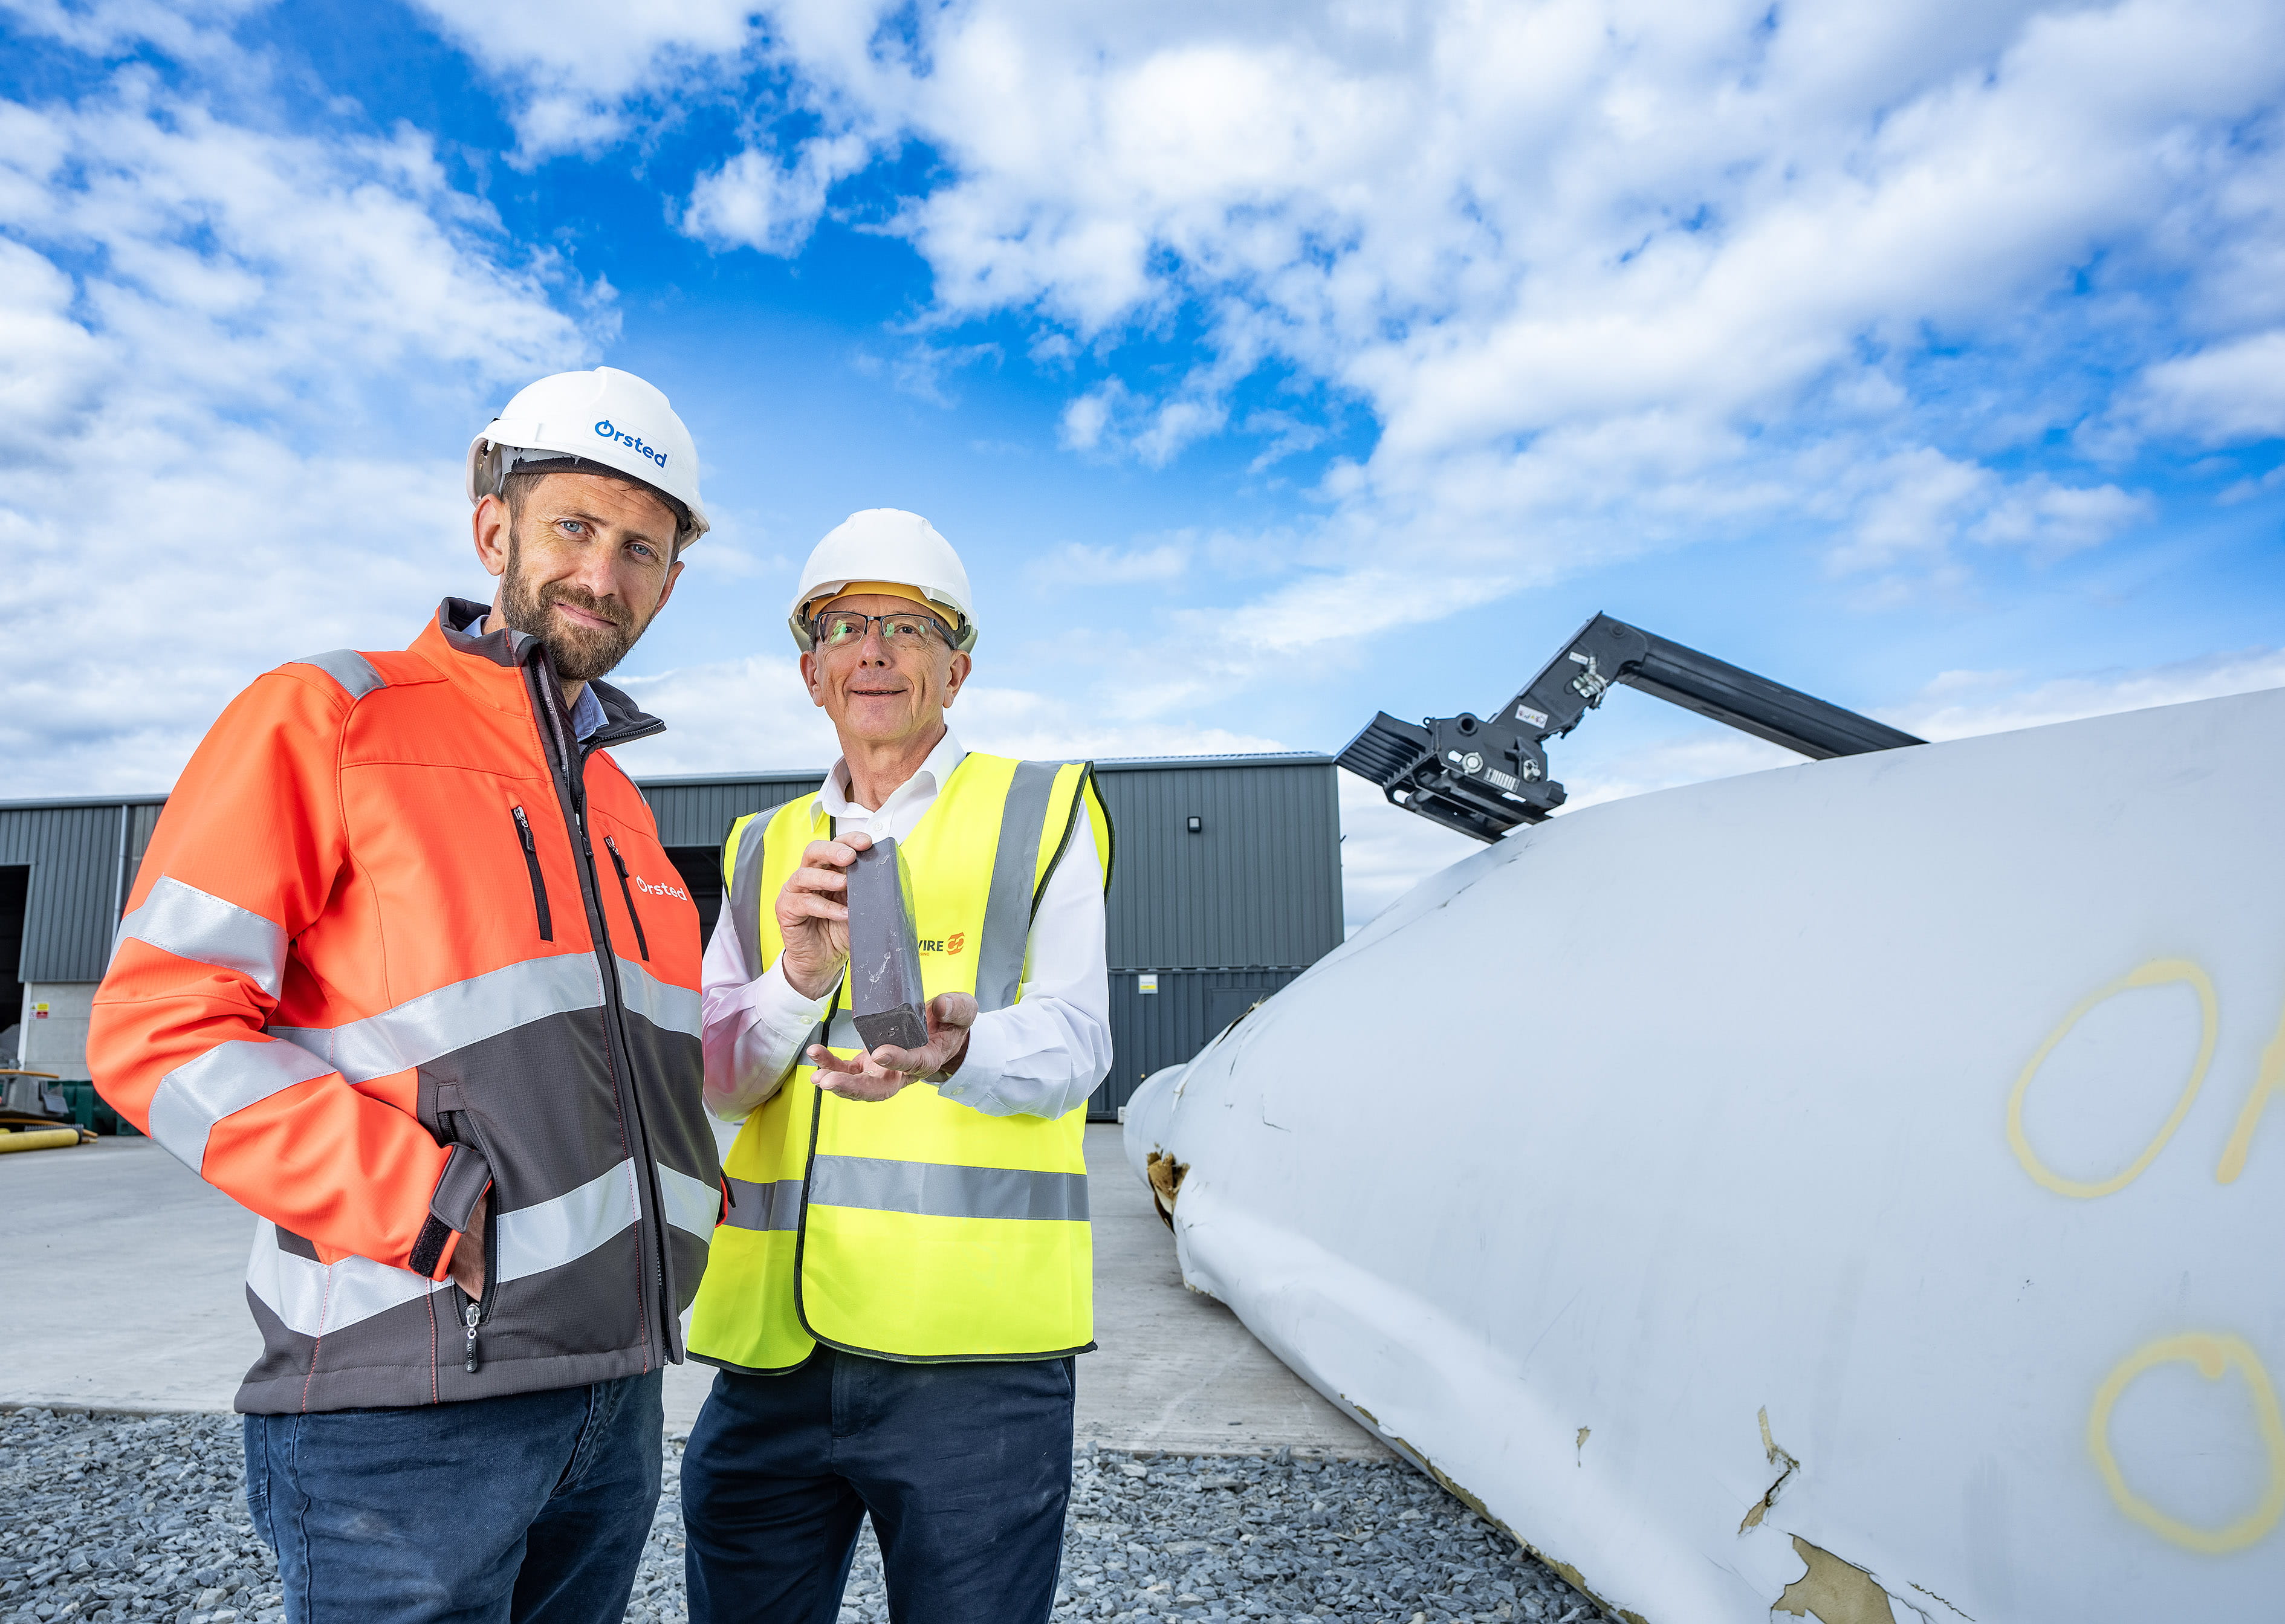 Pictured next to a decommissioned blade are (l-r) Ray O’Connell, Director of Operations at Ørsted UK & Ireland and Andrew Billingsley, CEO of Plaswire.